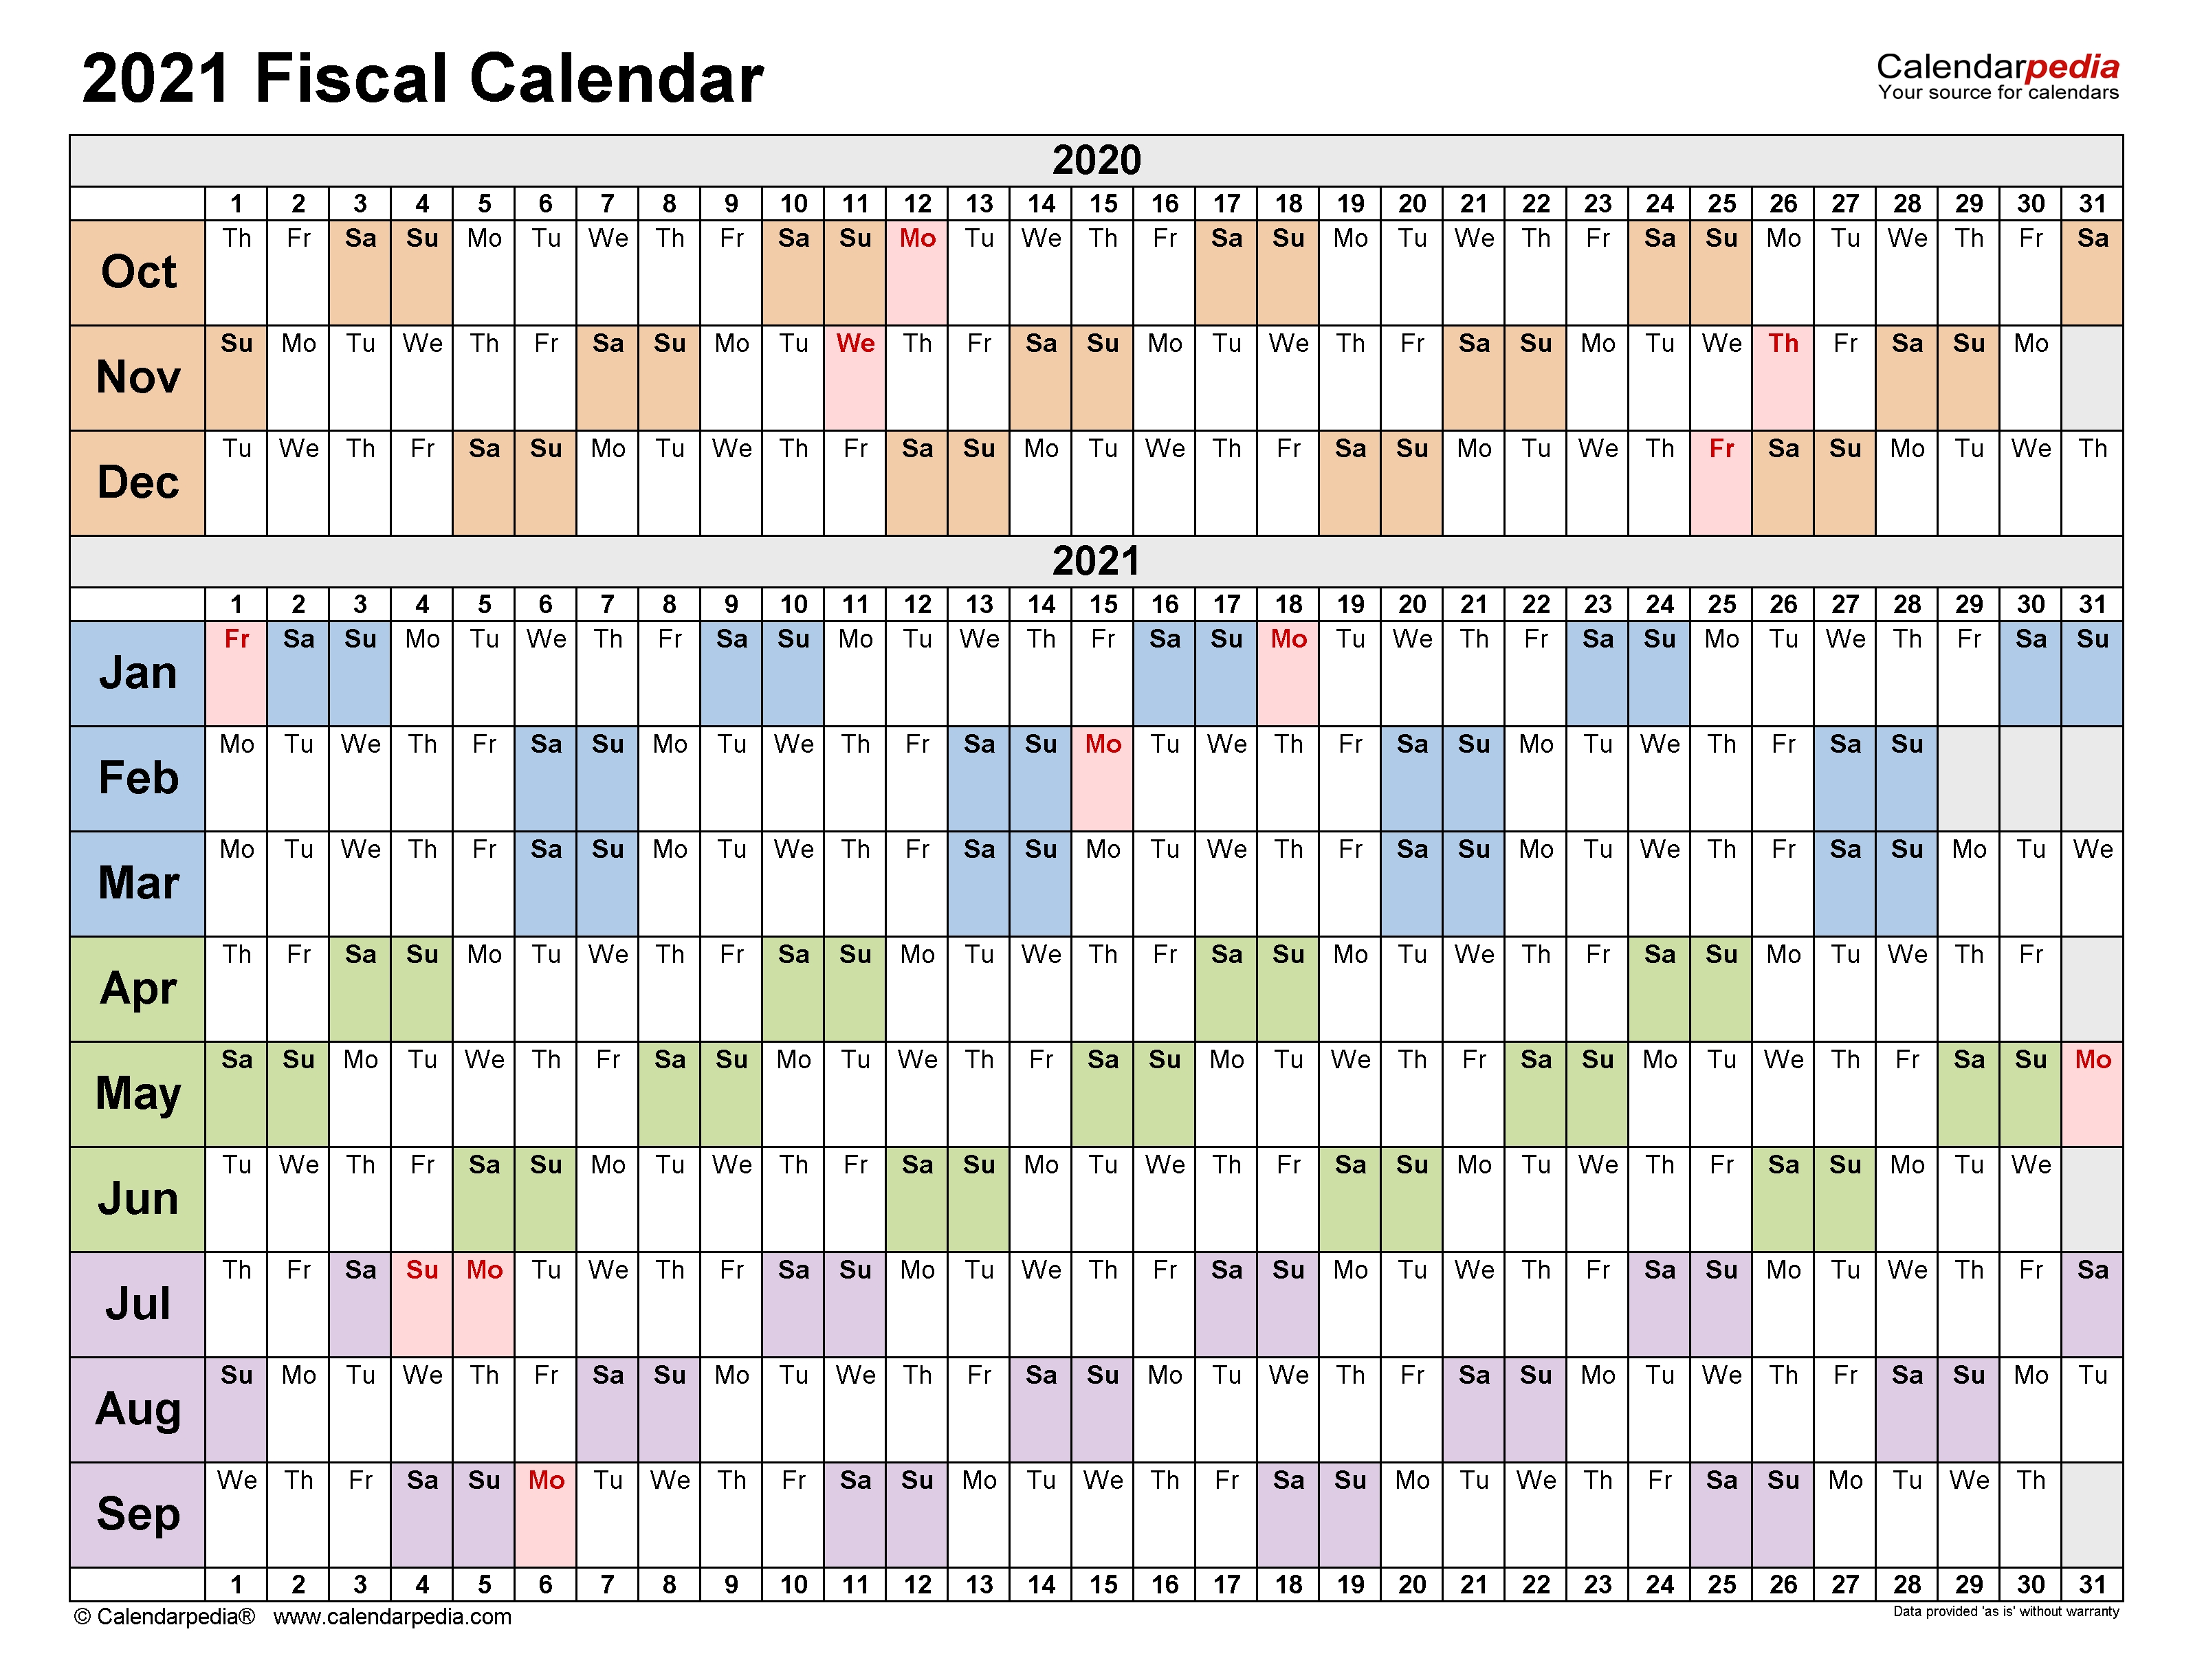 Fiscal Calendars 2021 - Free Printable Excel Templates  Financial Year 2021 Dates